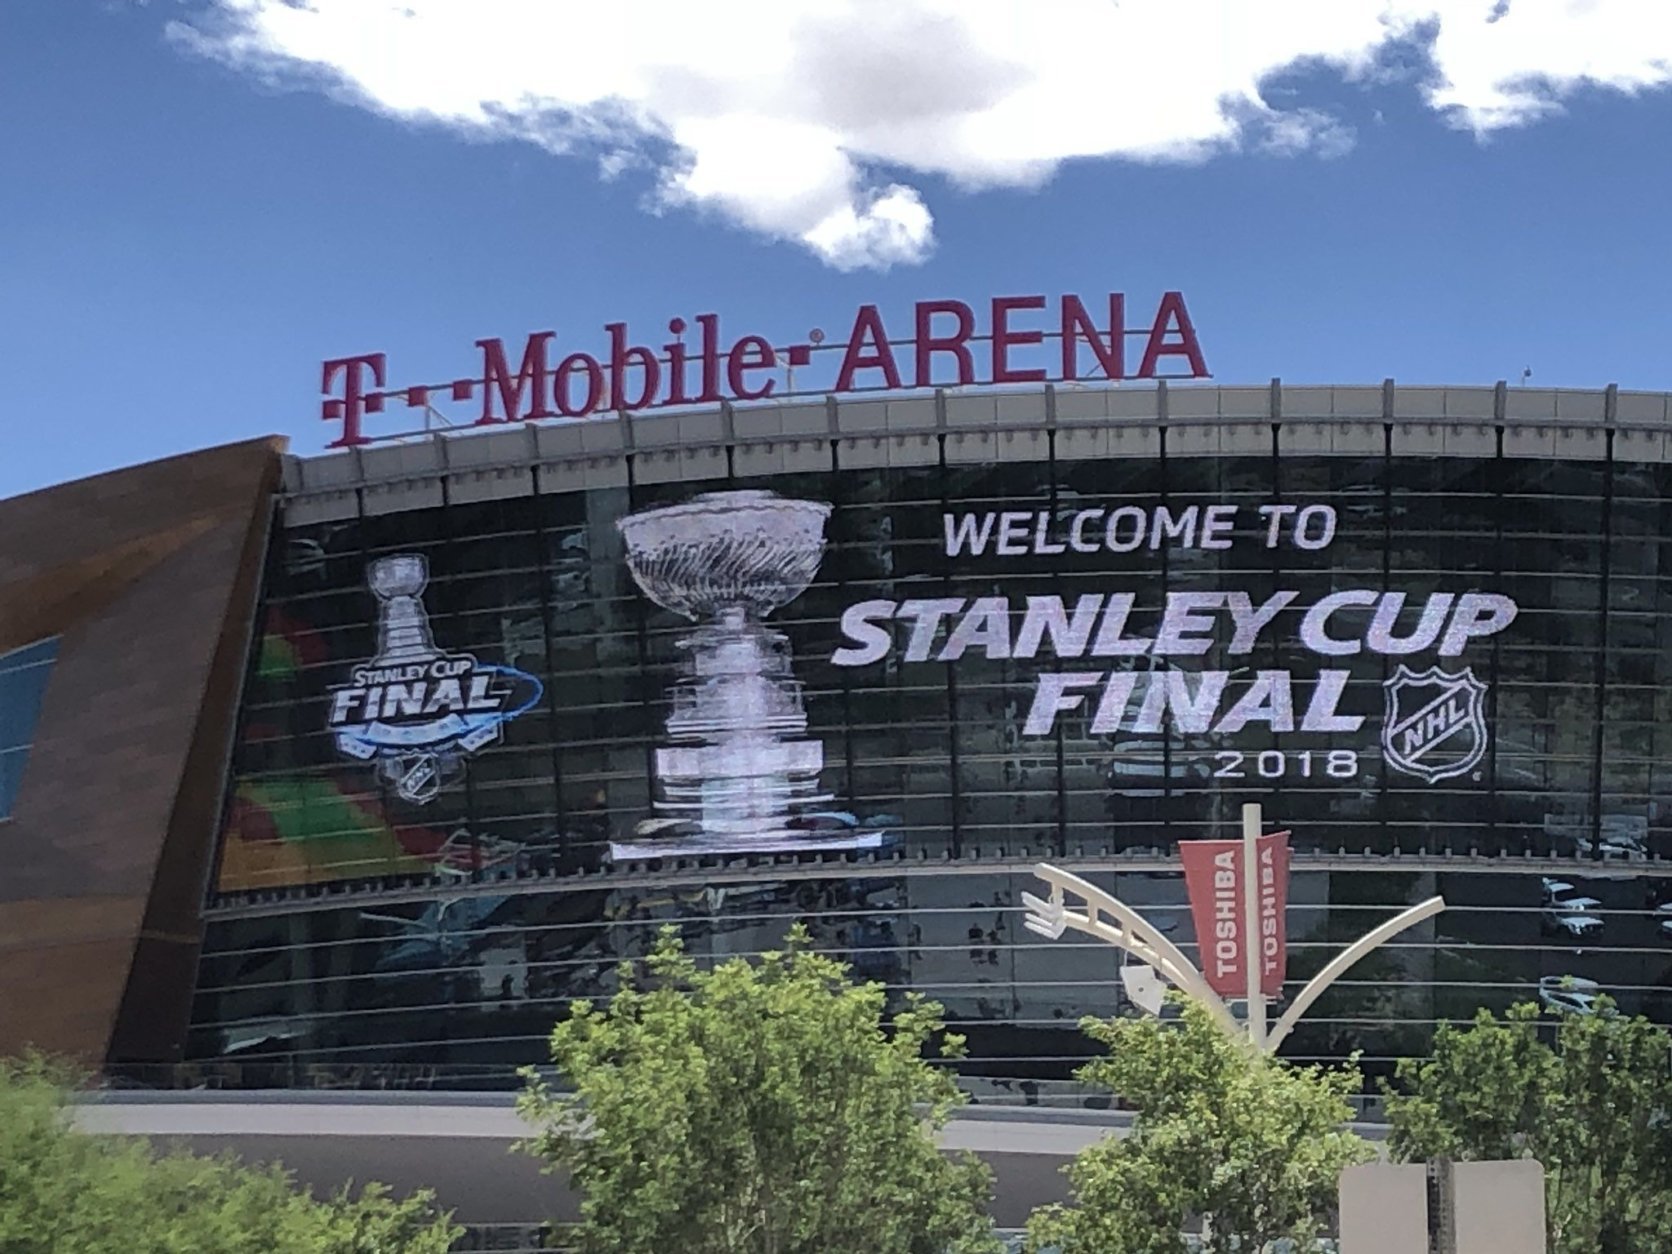 The T Mobile Arena, in Las Vegas, site of Game 1 of the Stanley Cup Finals. (WTOP/Brennan Haselton)